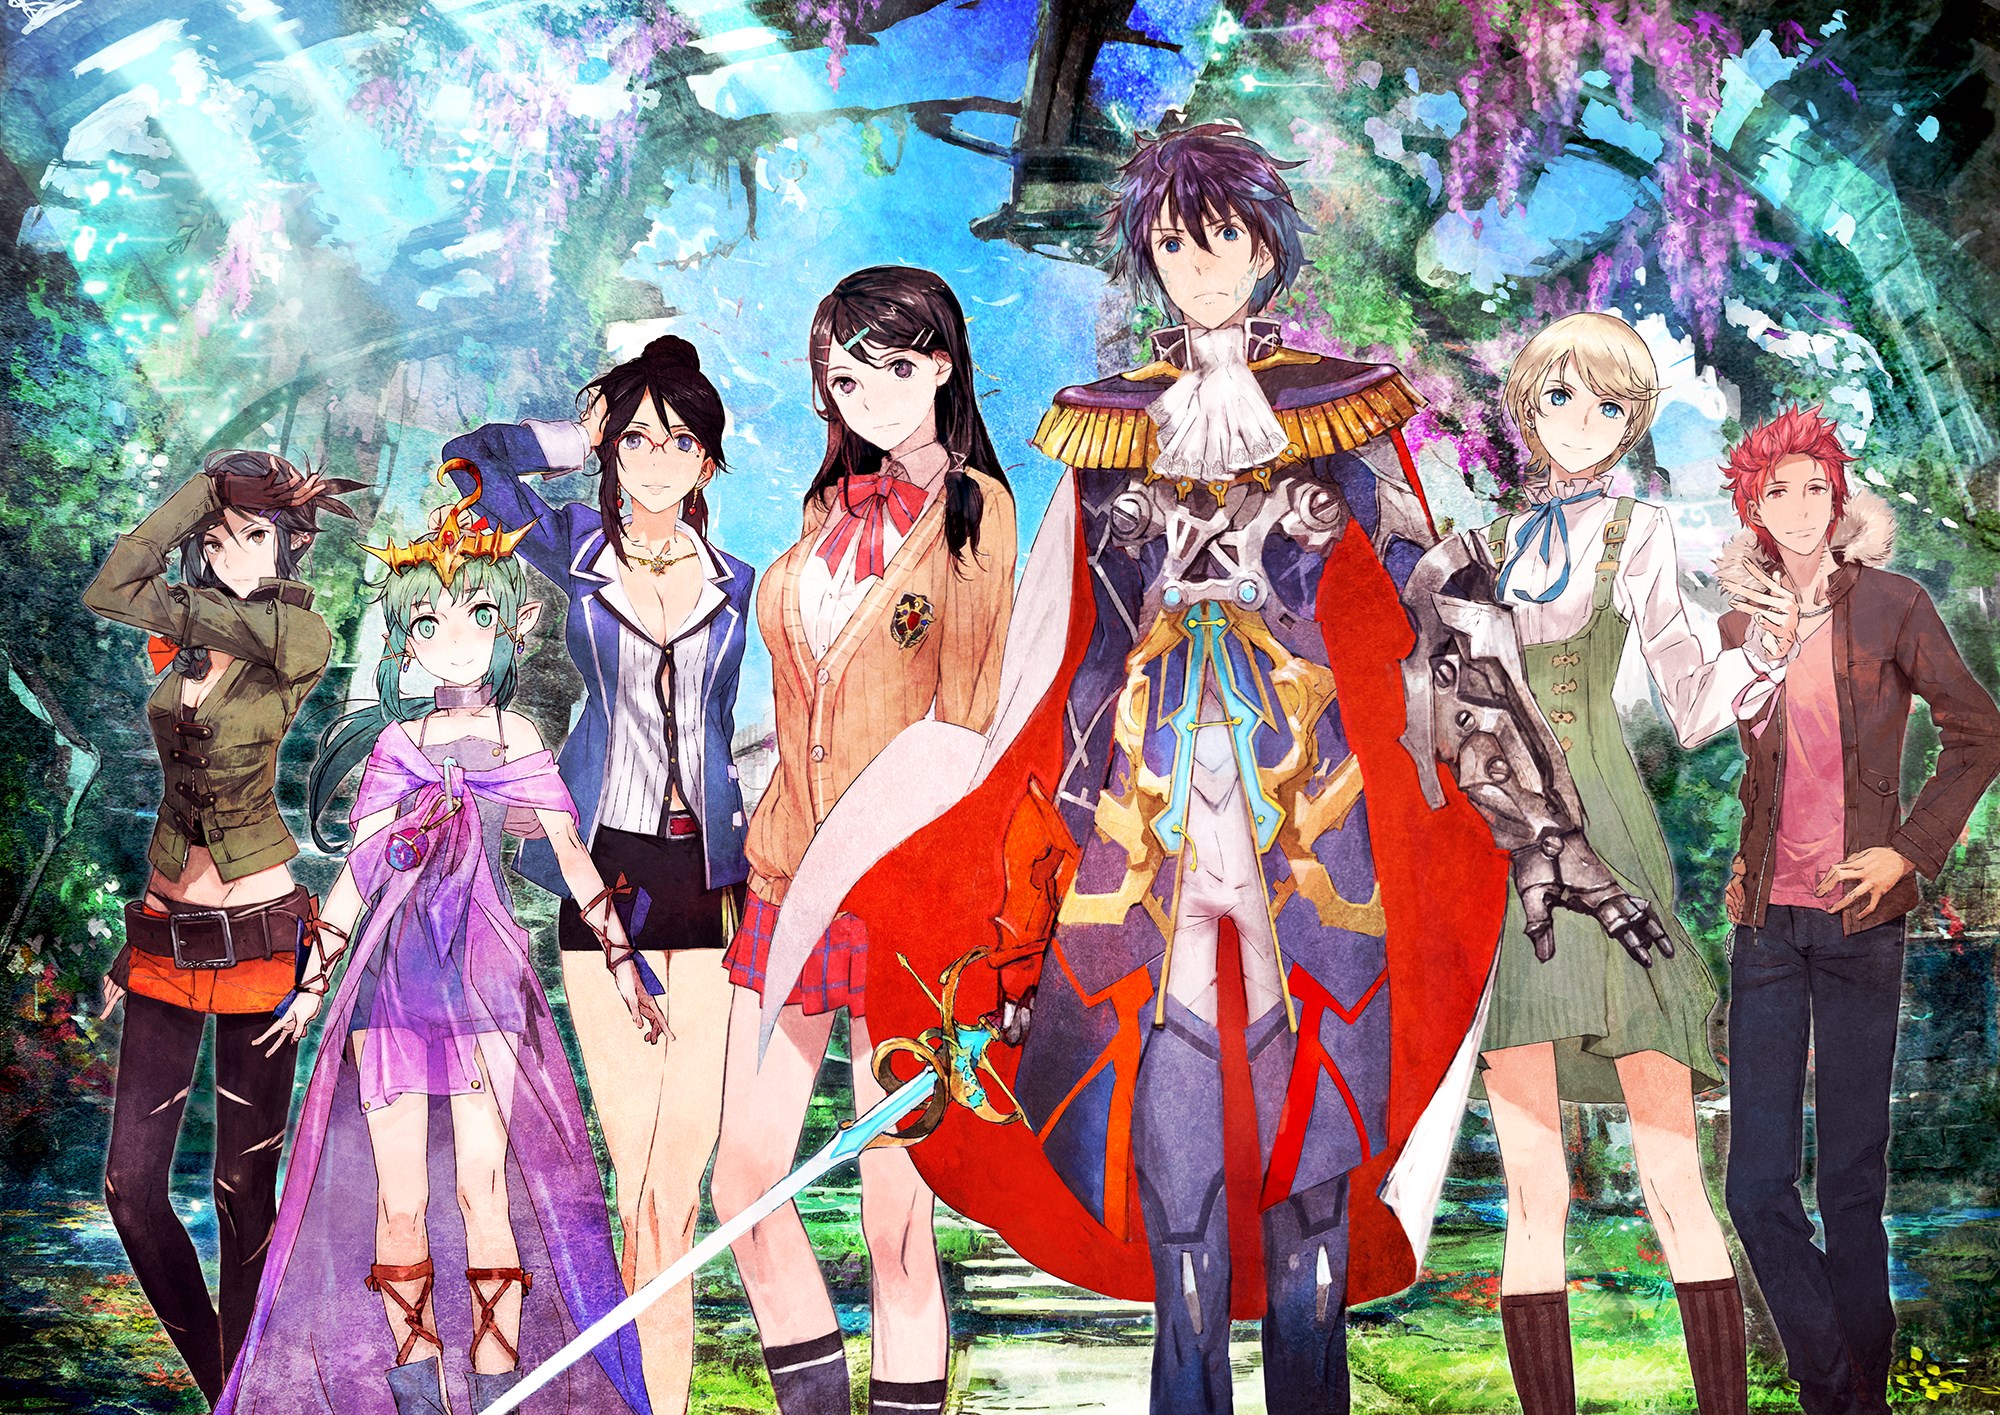 Tokyo Mirage Sessions Wallpapers